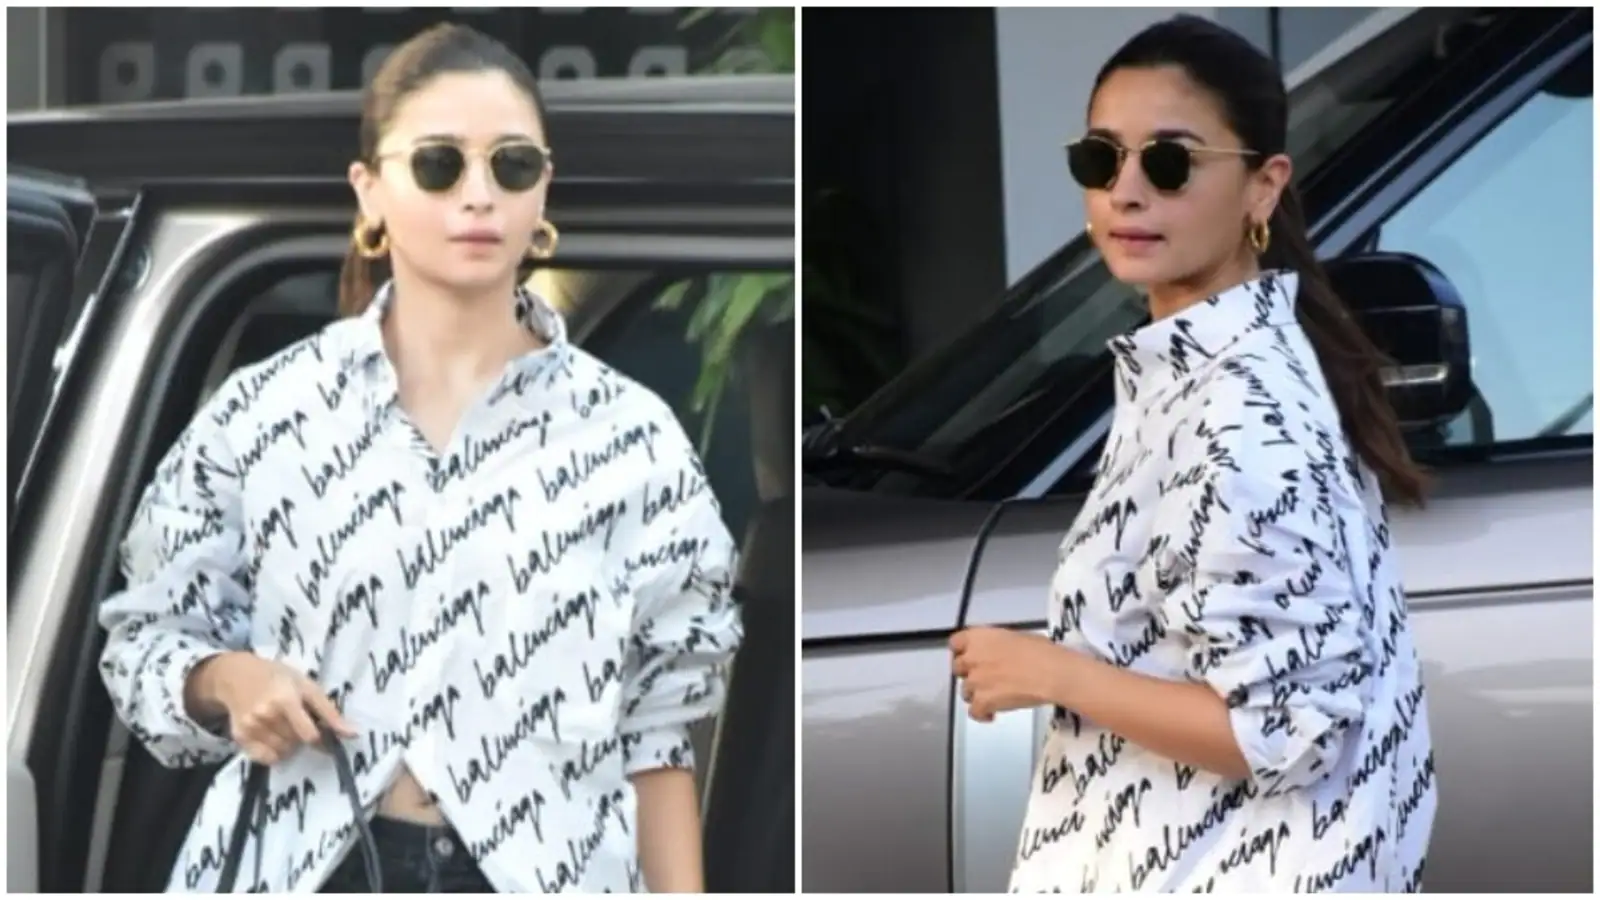 Alia Bhatt’s oversized shirt and distressed denim shorts is the glam airport look for newlywed modern woman: All pics